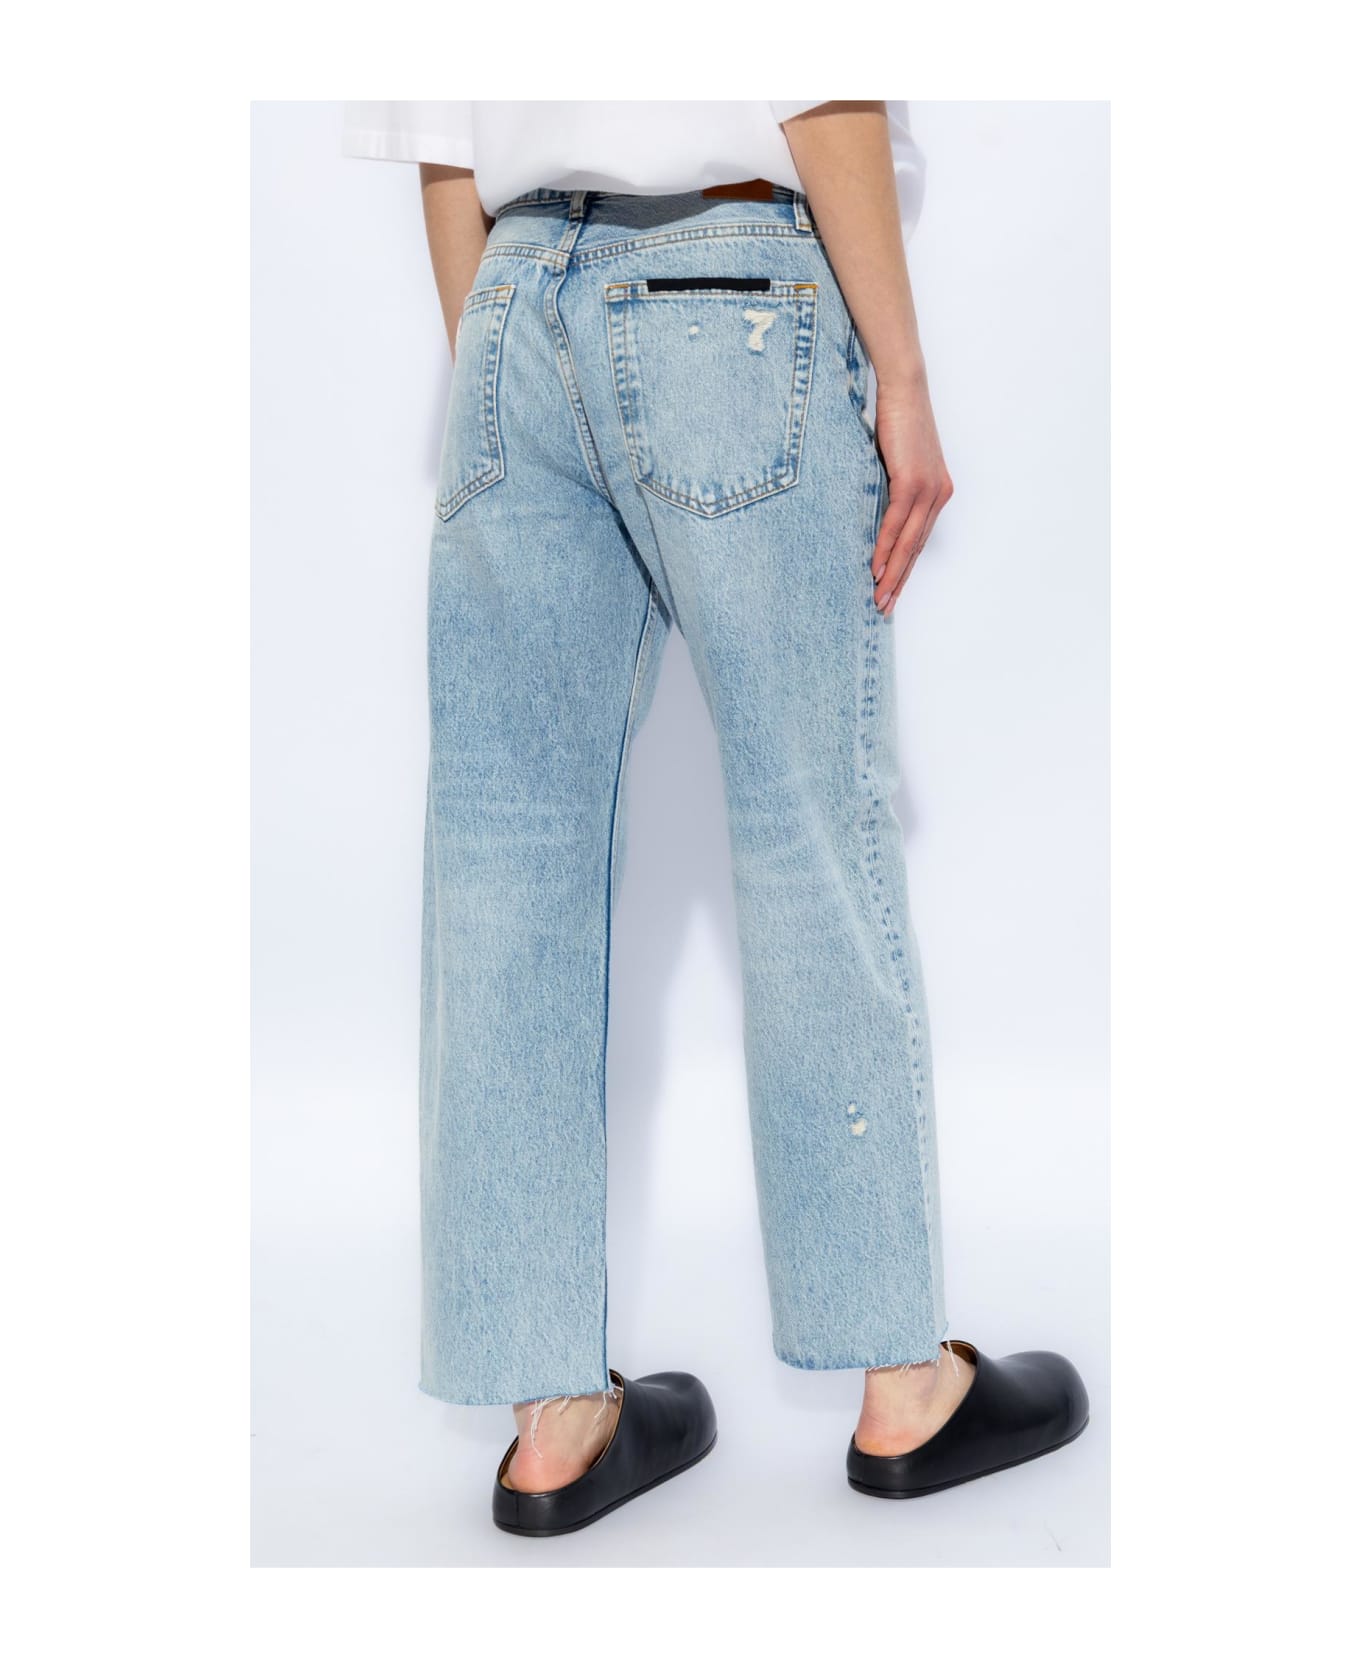 Anine Bing 'gavin' Relaxed Straight Jeans - Washed blue